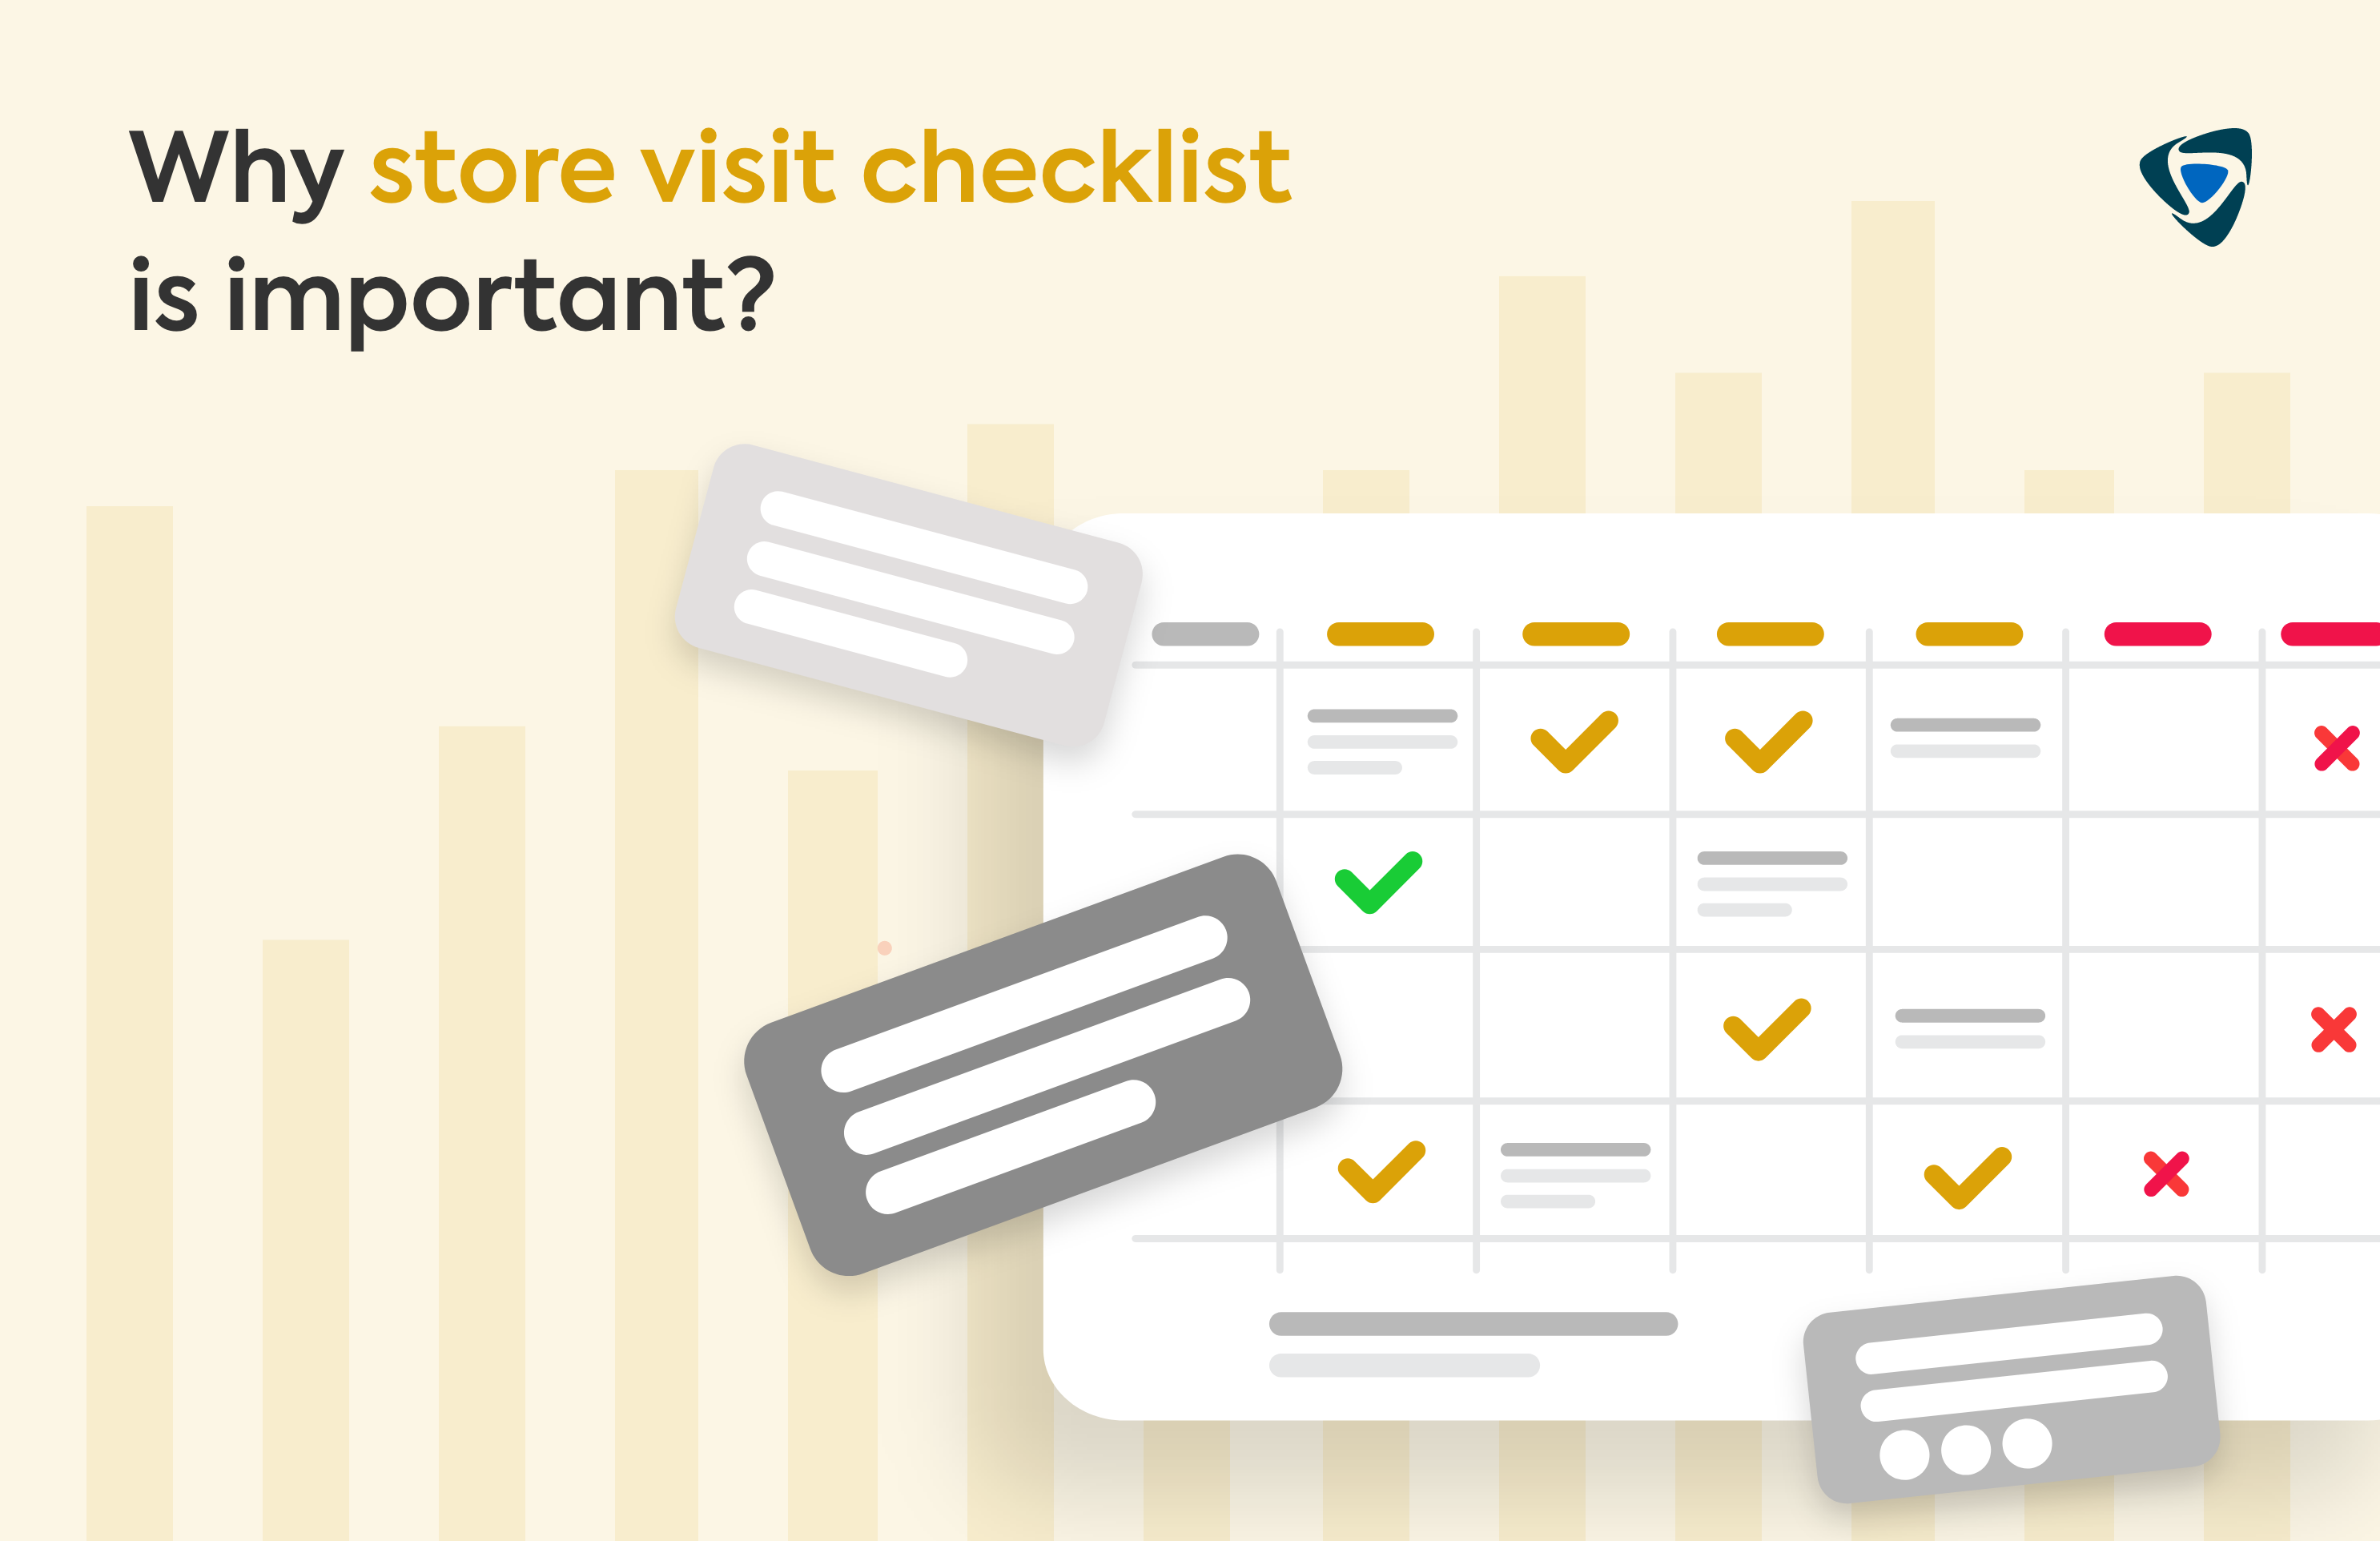 Why store visit checklist is important?